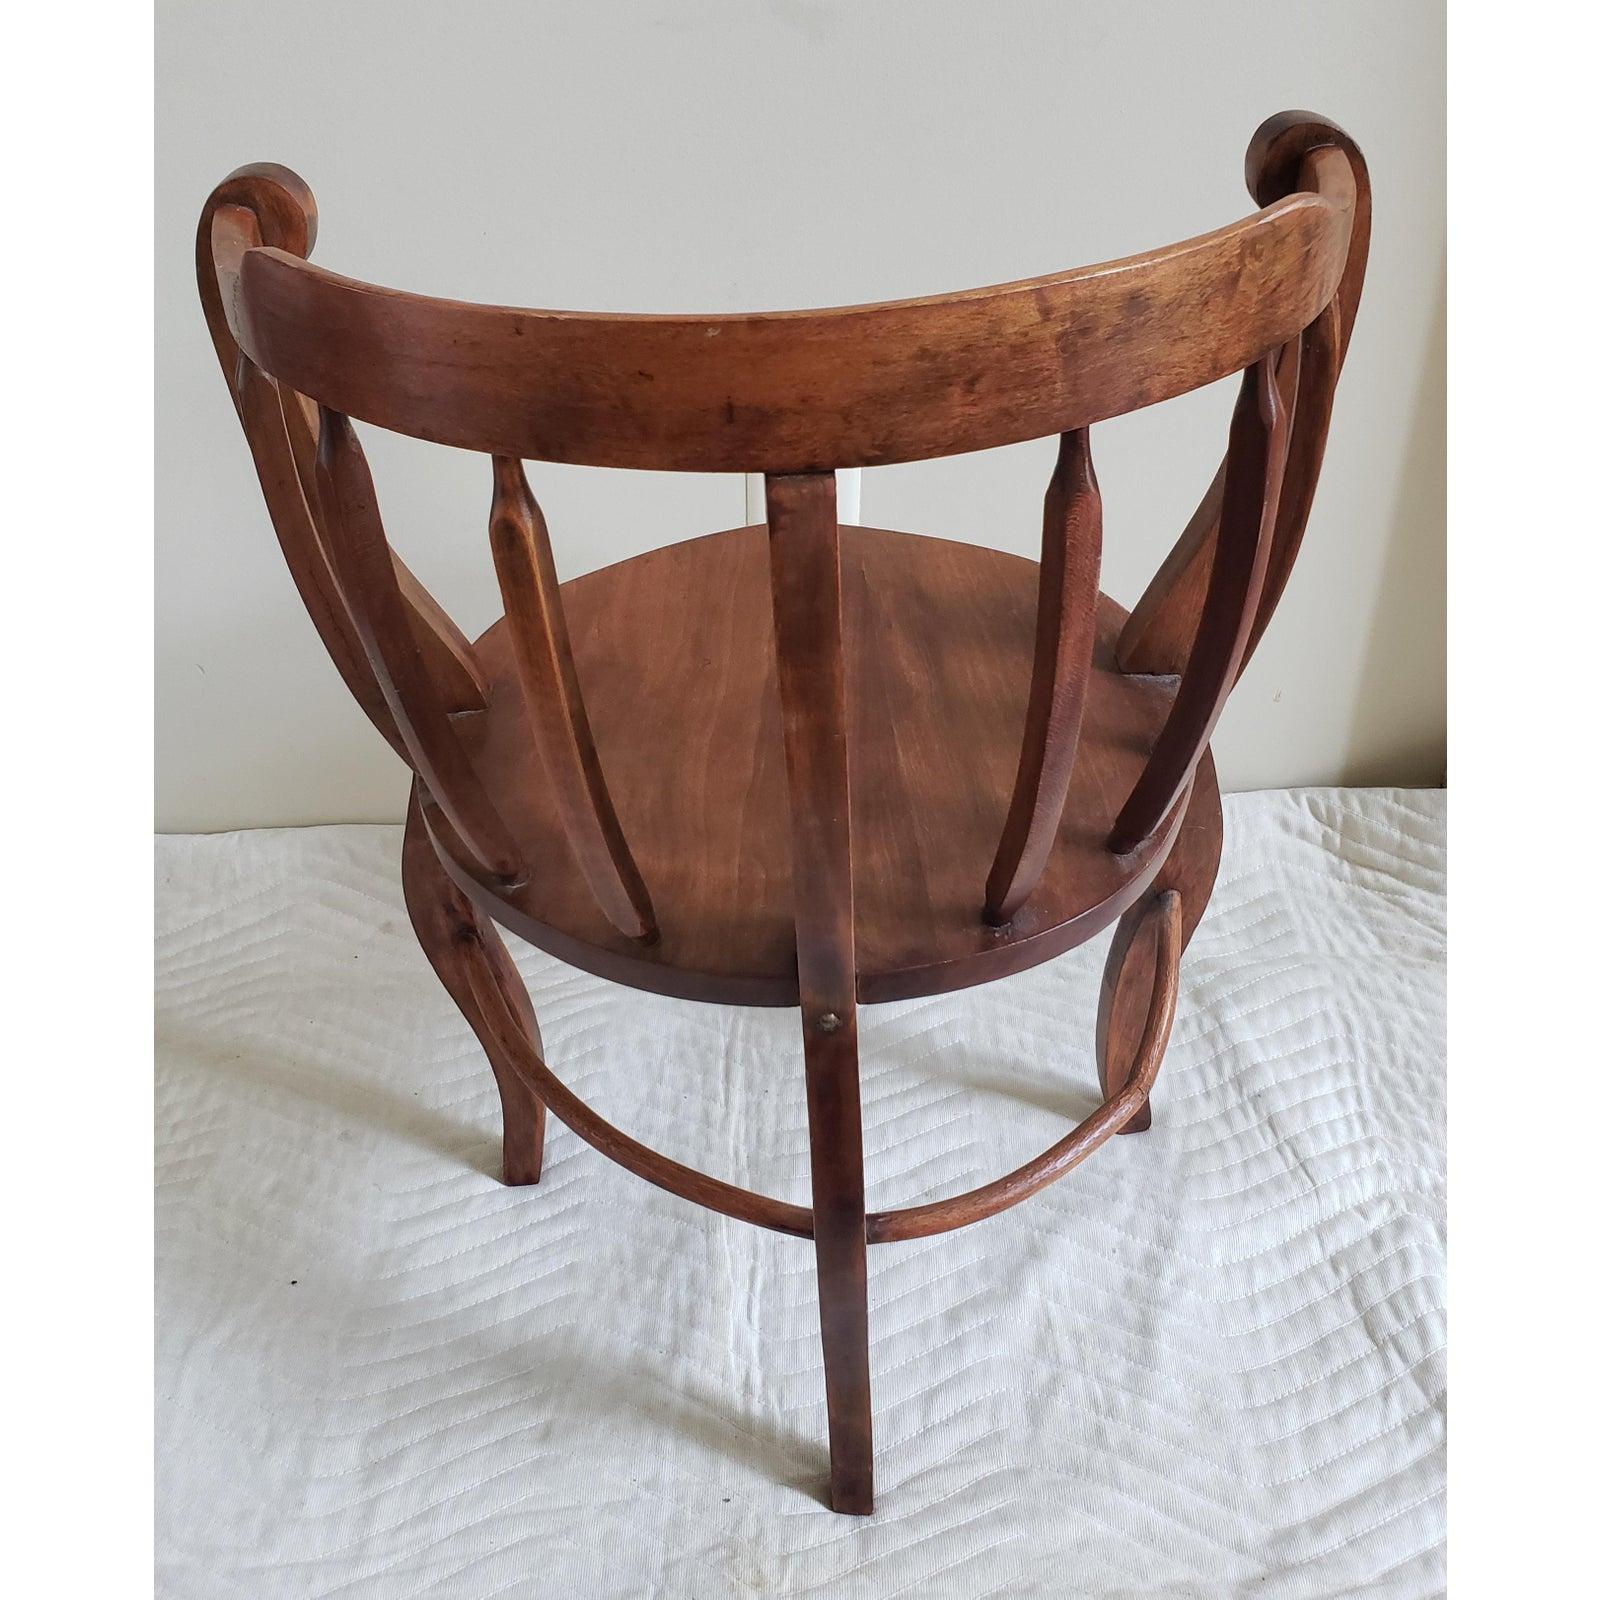 Antique round chair with vine connecting legs. Good vintage condition. Chair measures 23 W x 20 D x 30 H.
    